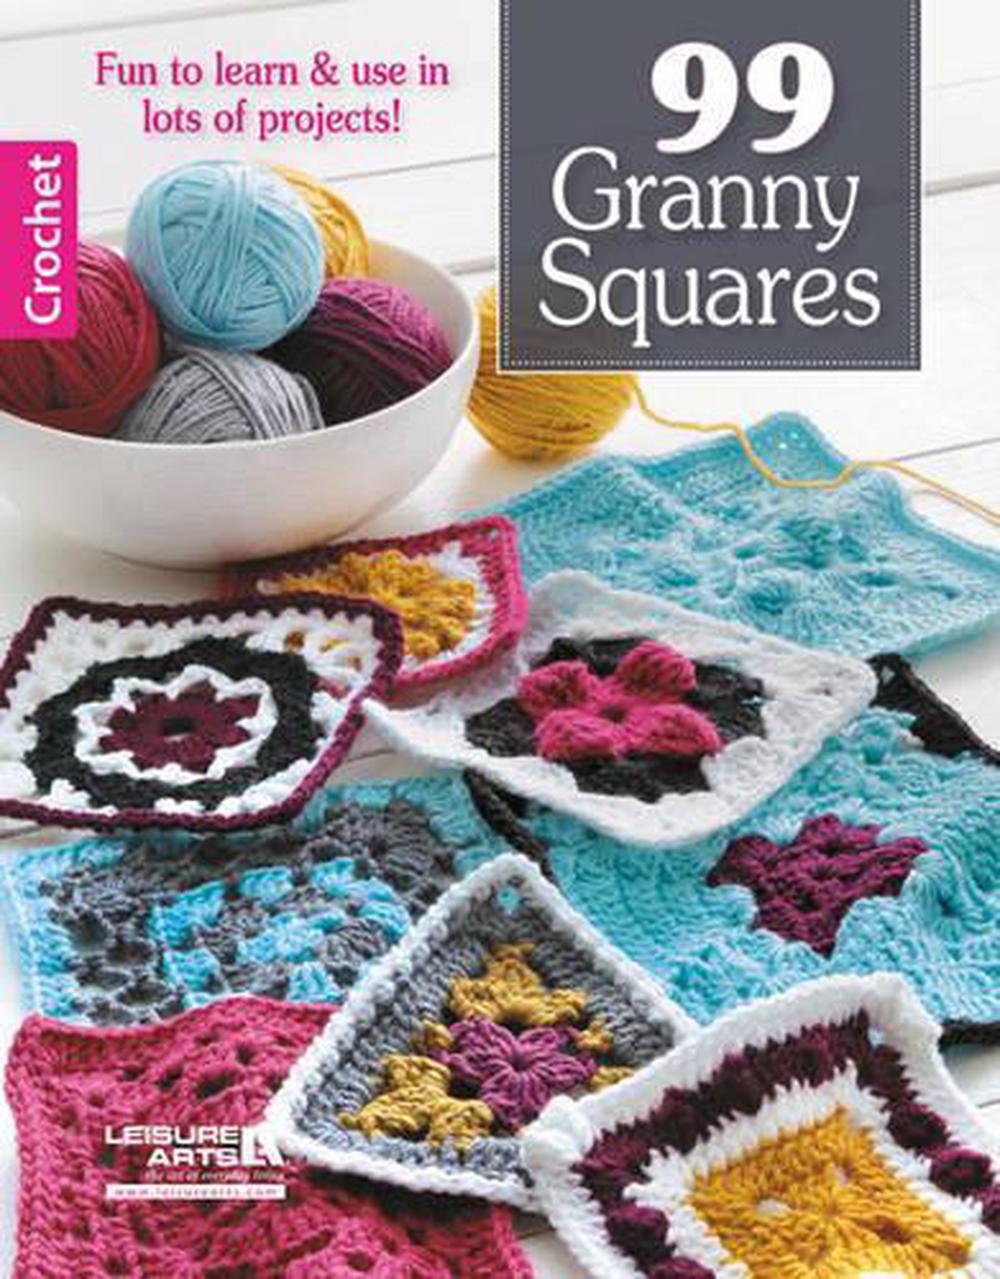 99 Granny Squares To Crochet By Leisure Arts English Paperback Book